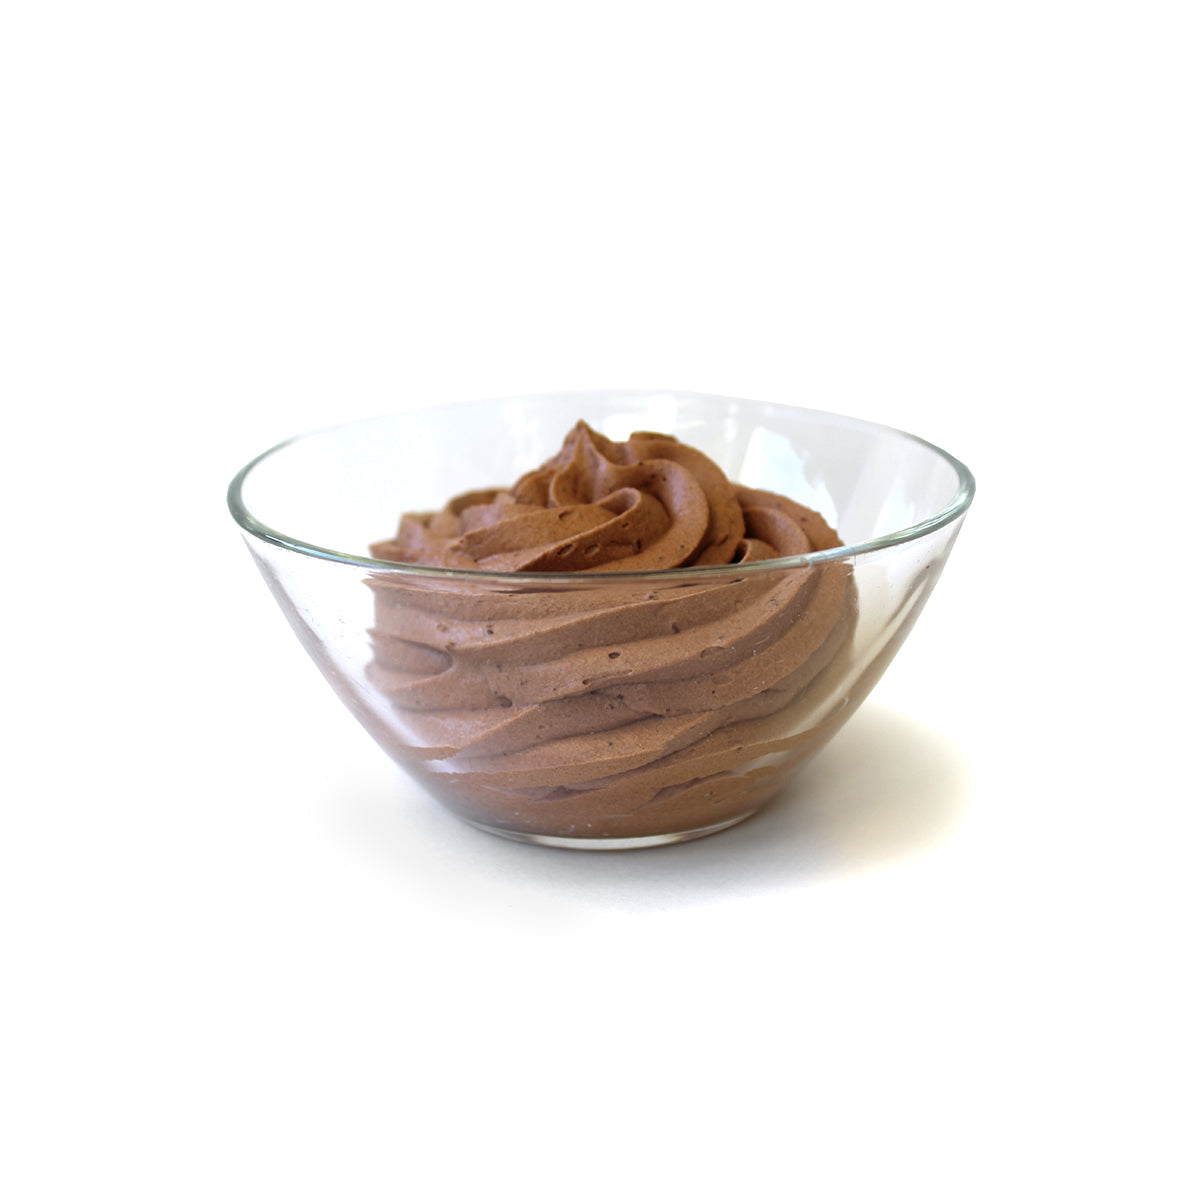 Chocolate Mousse Mix in bowl